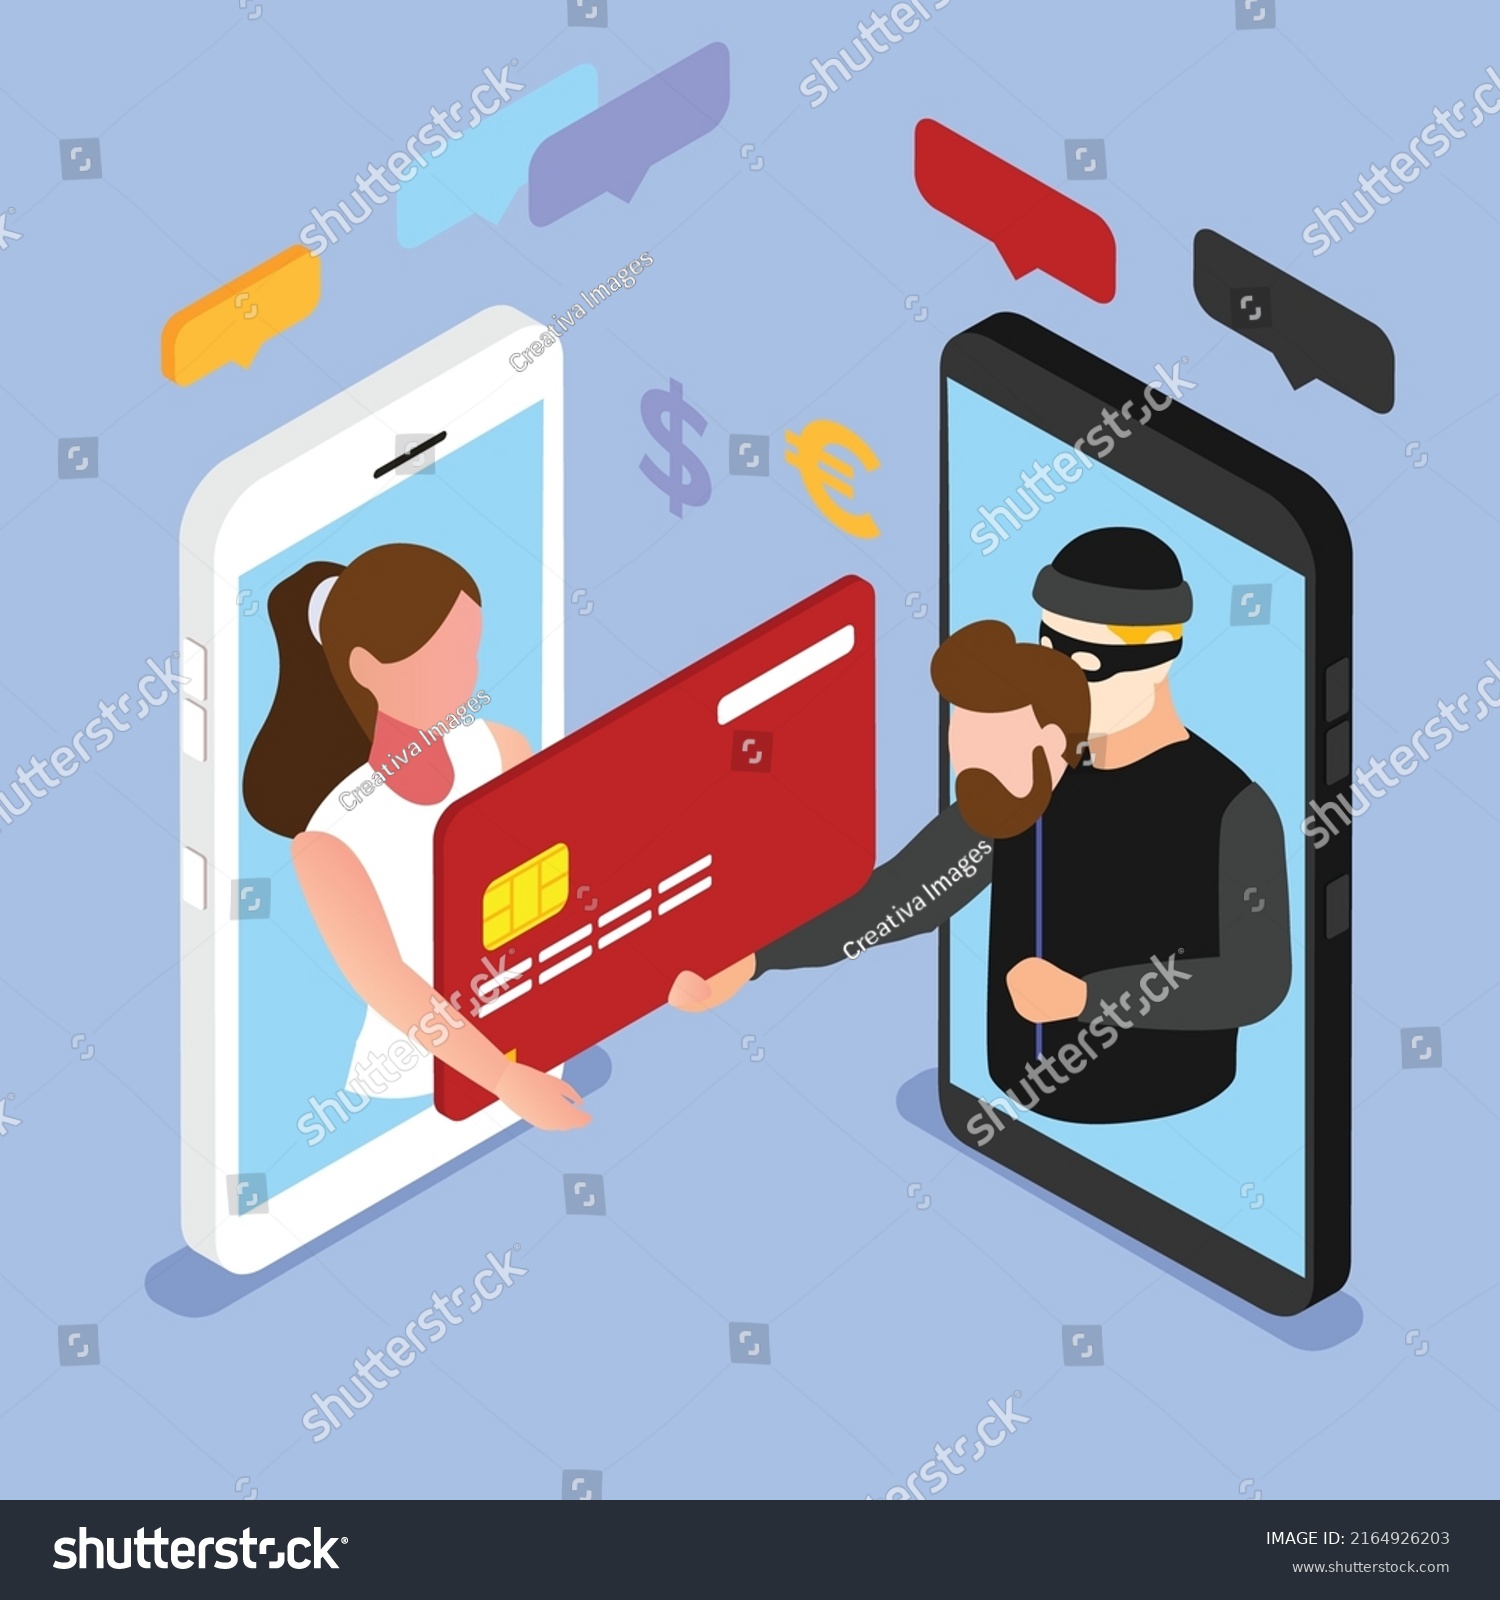 Woman on the phone screen and the scammer stealing a credit card isometric 3d vector illustration concept for banner, website, illustration, landing page, flyer, etc. #2164926203